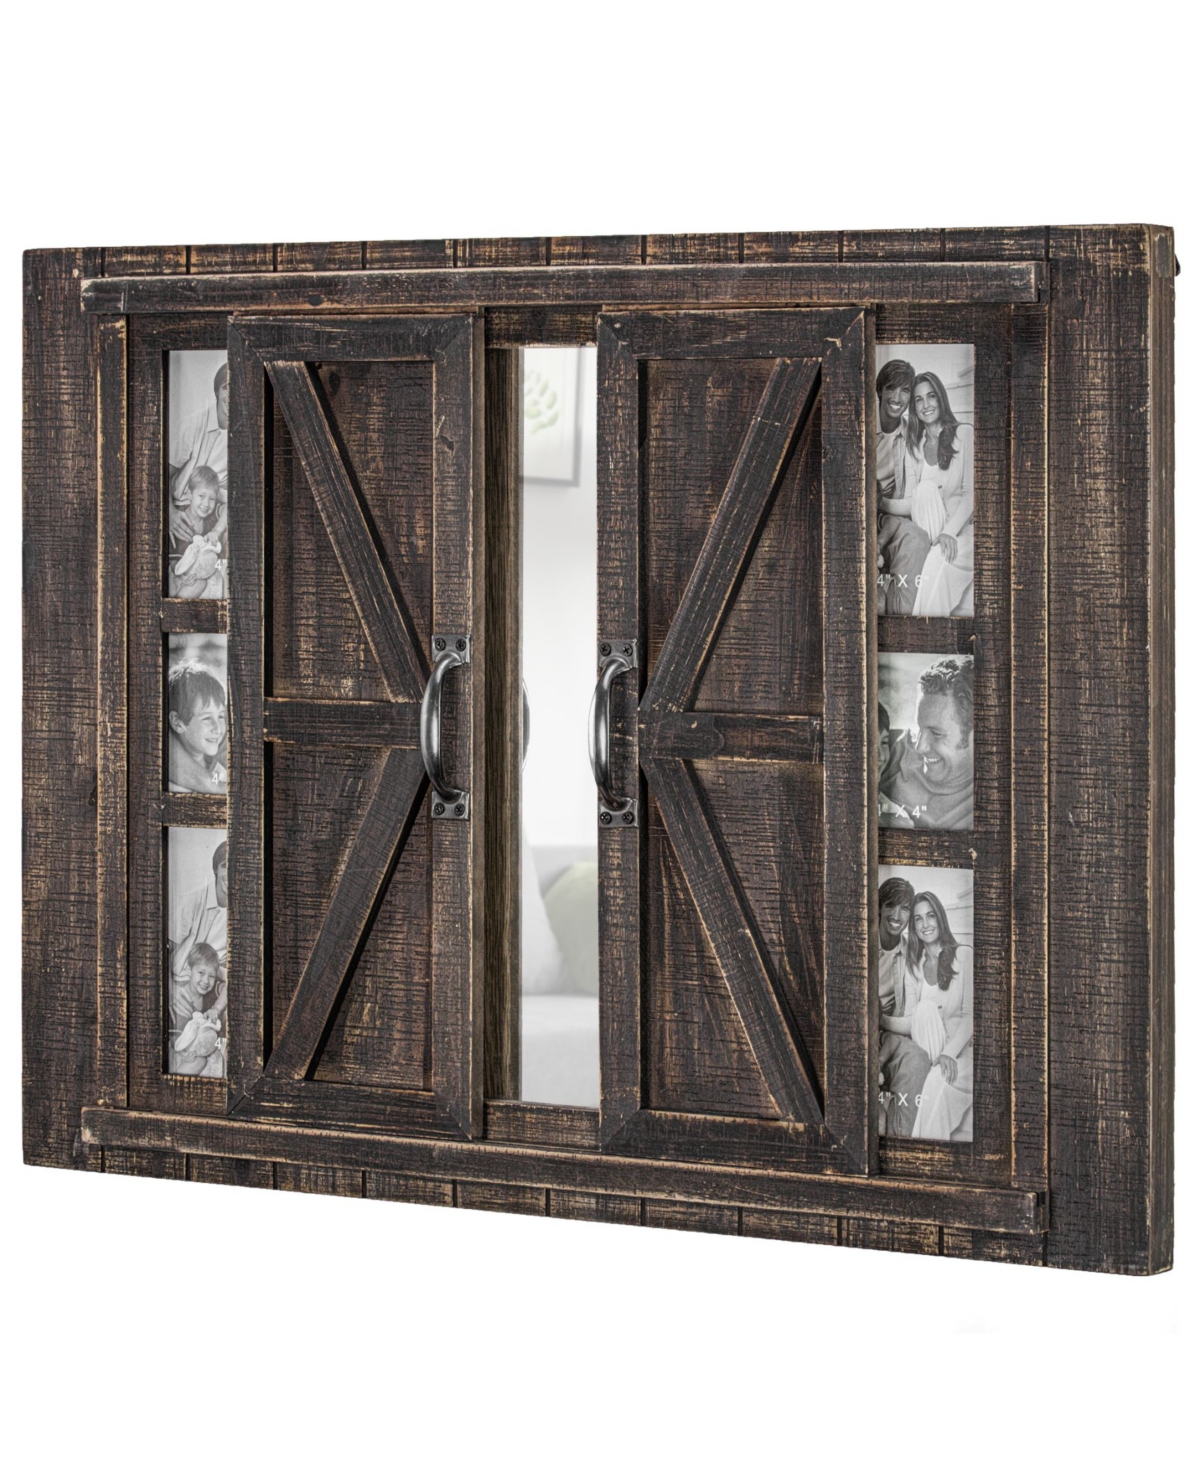 American Art Decor Rustic Barn Door Picture Frame with Mirror - Brown